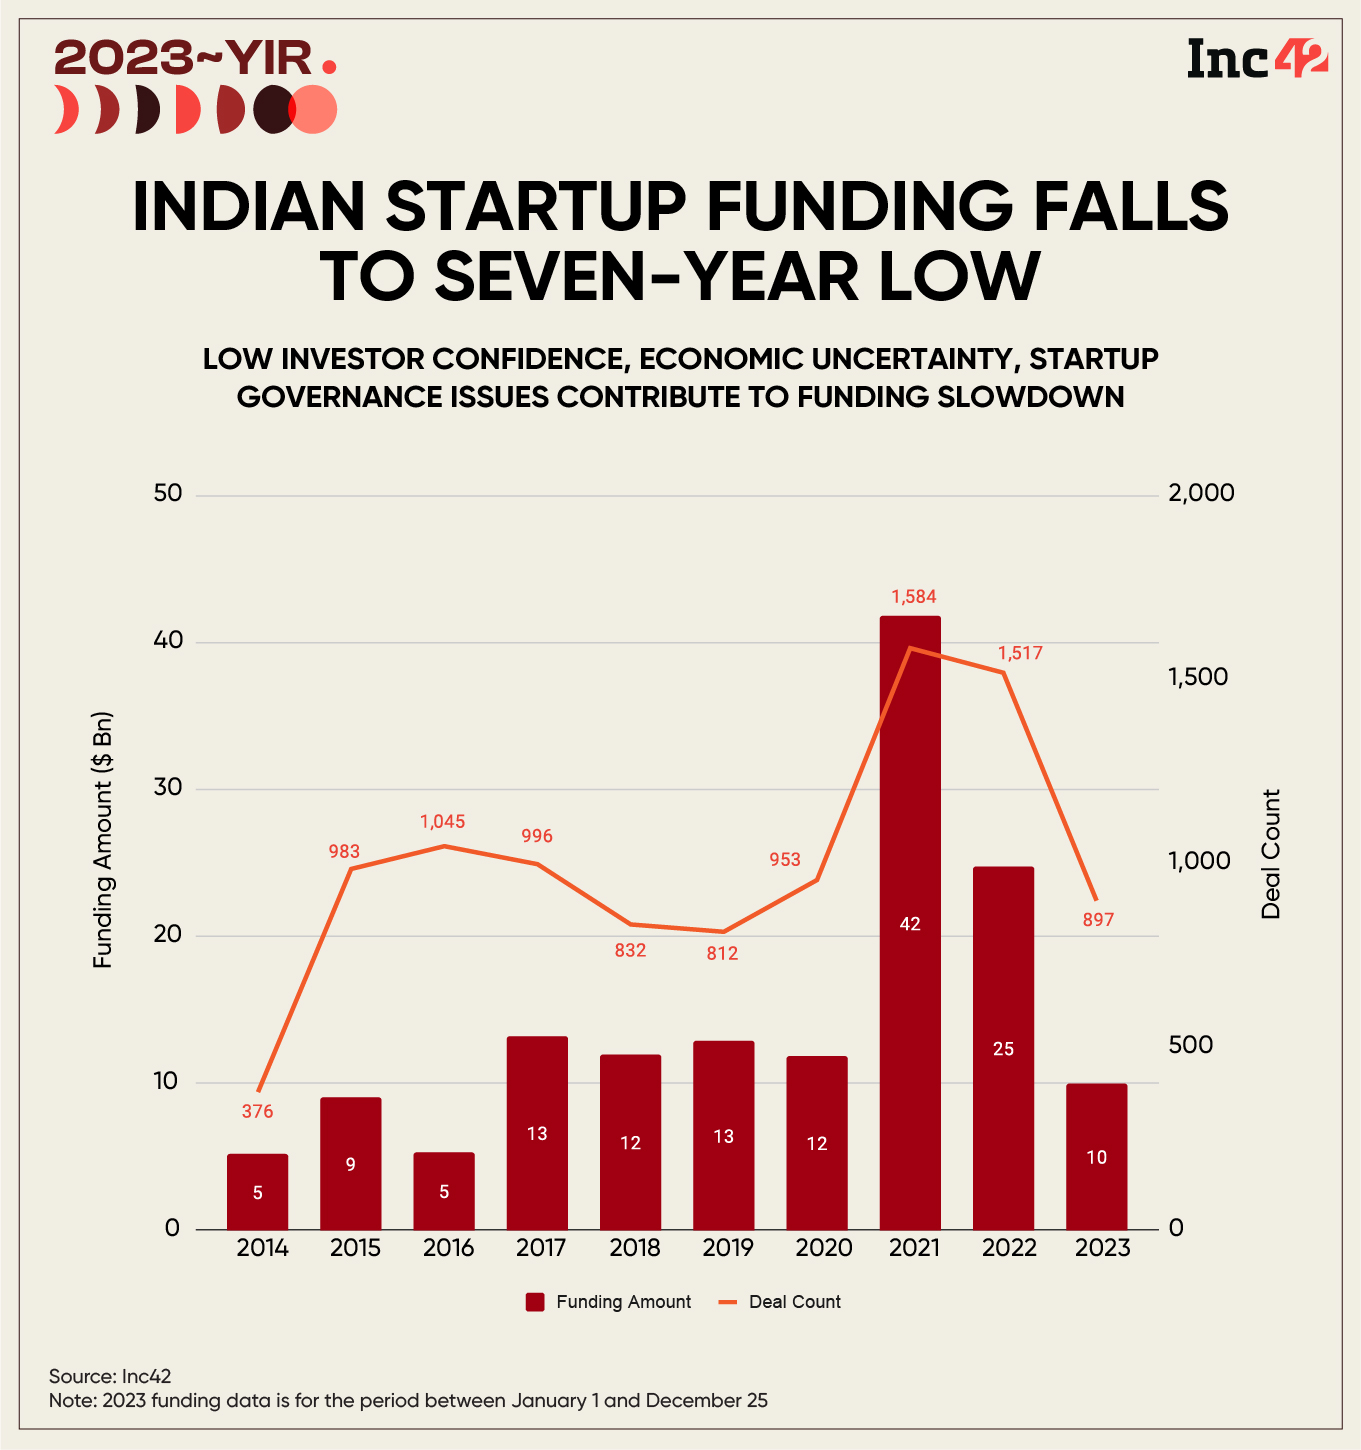 Startup Funding Hits A 7-Year Low Of $10 Bn As Investor Appetite Wanes In 2023